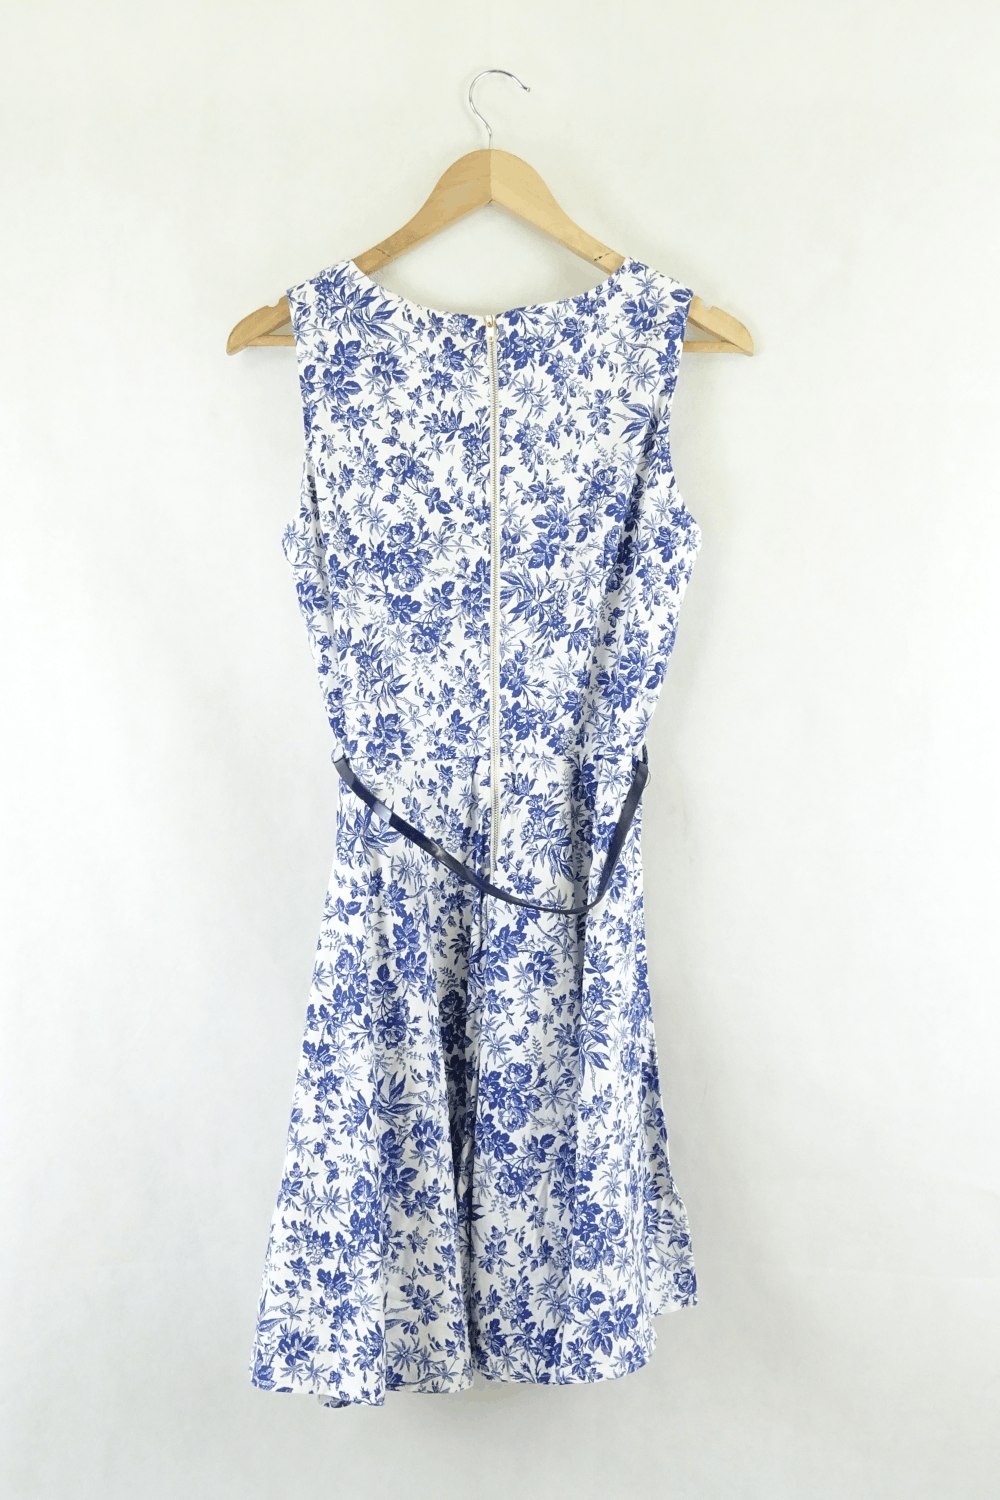 Catalog Blue And White Floral Dress 12